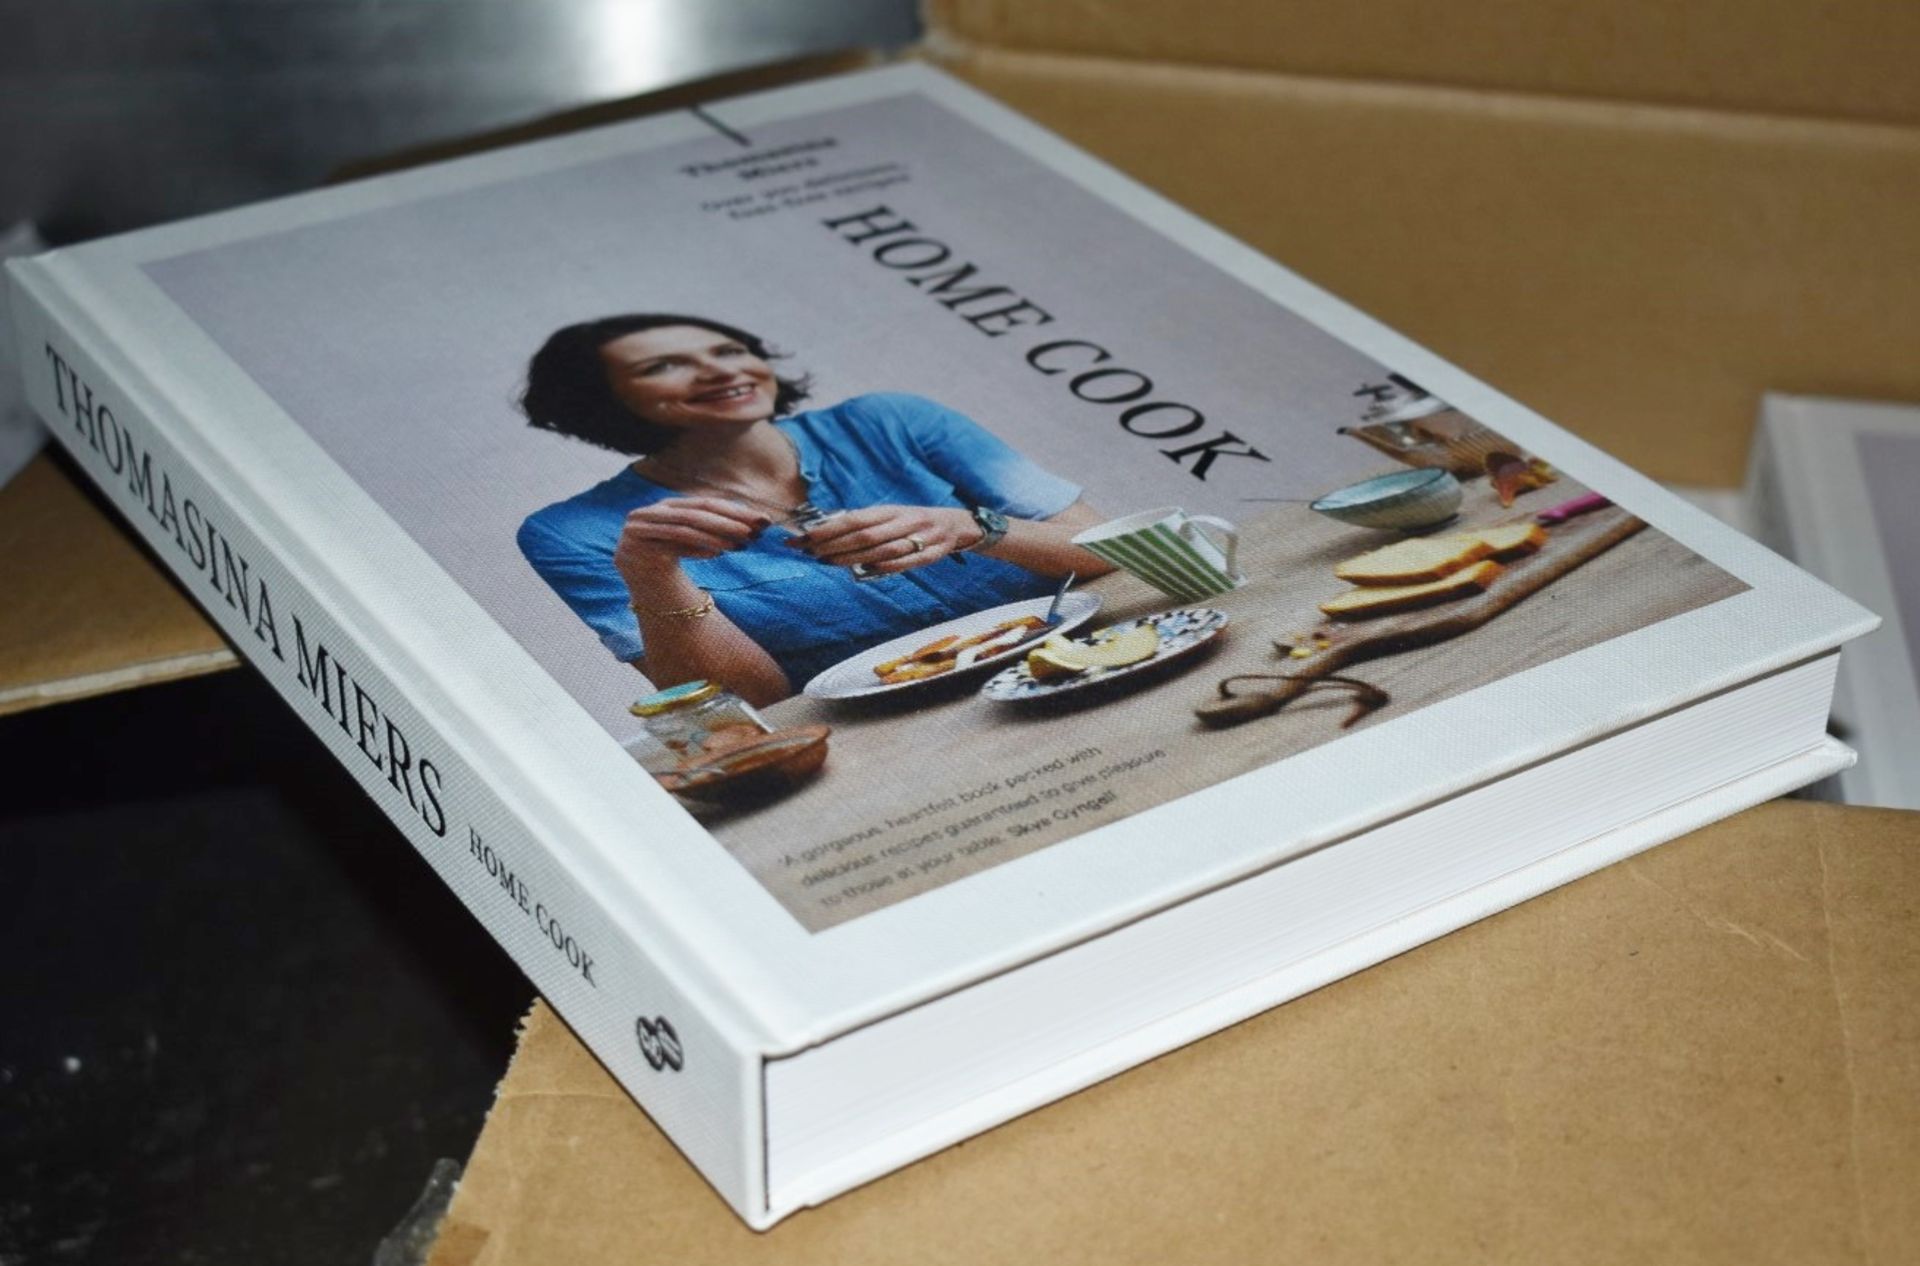 6 x Thomasina Miers Home Cook Book - RRP £25 Each - Ref: RB192 - CL558 - Location: Altrincham